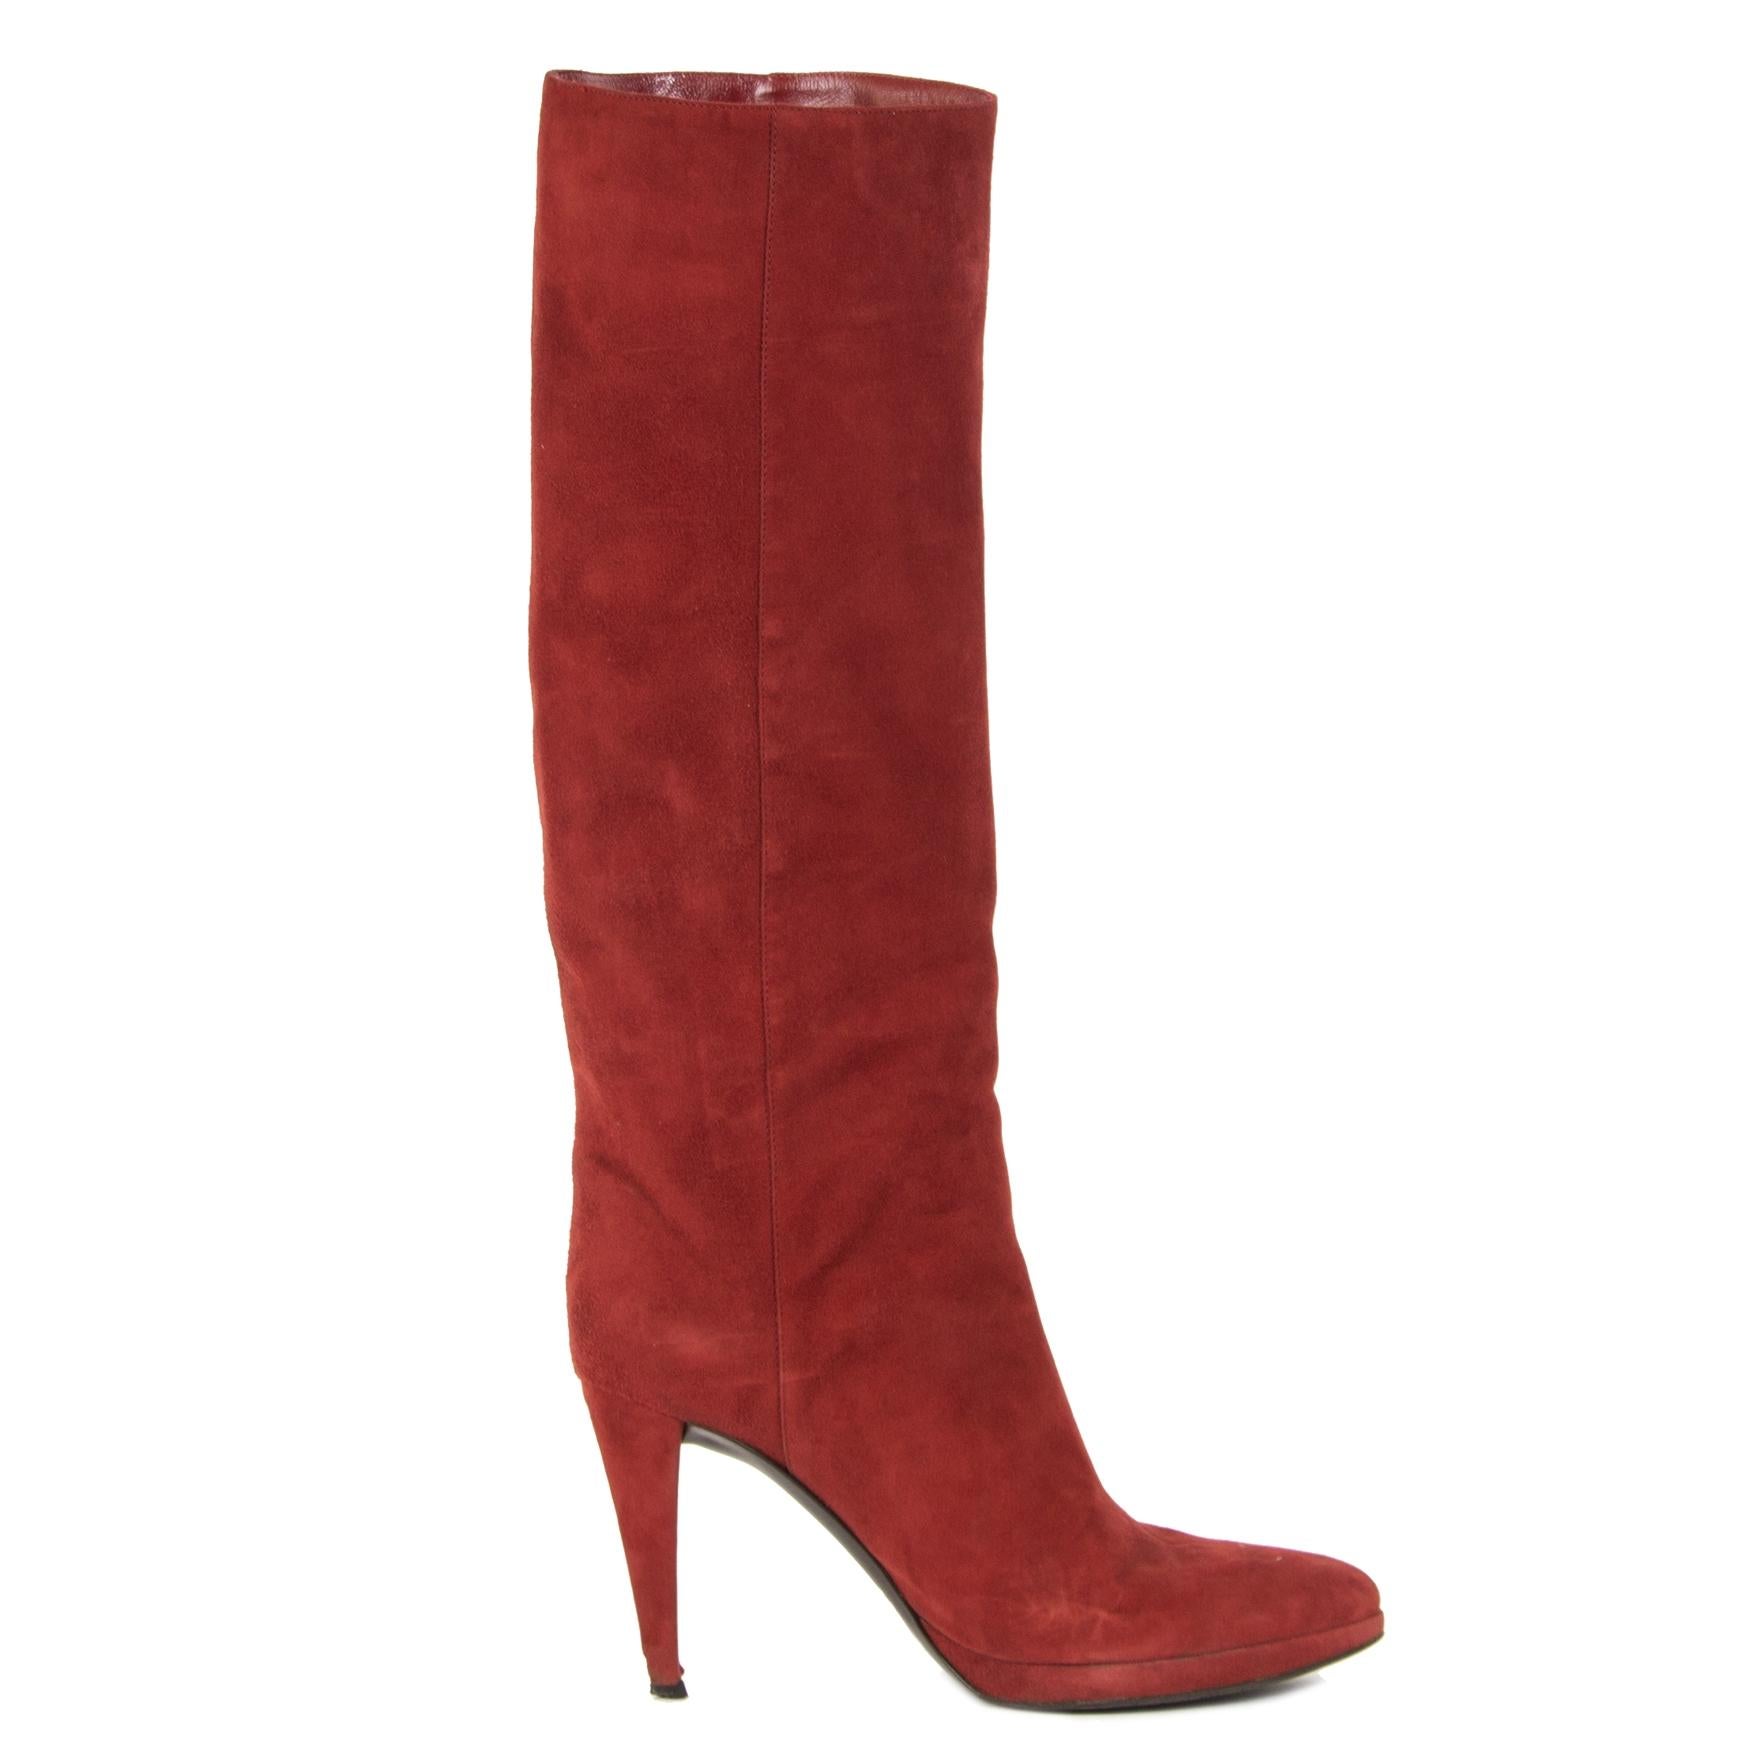 Sergio Rossi Red Suede High Boots - Size 41